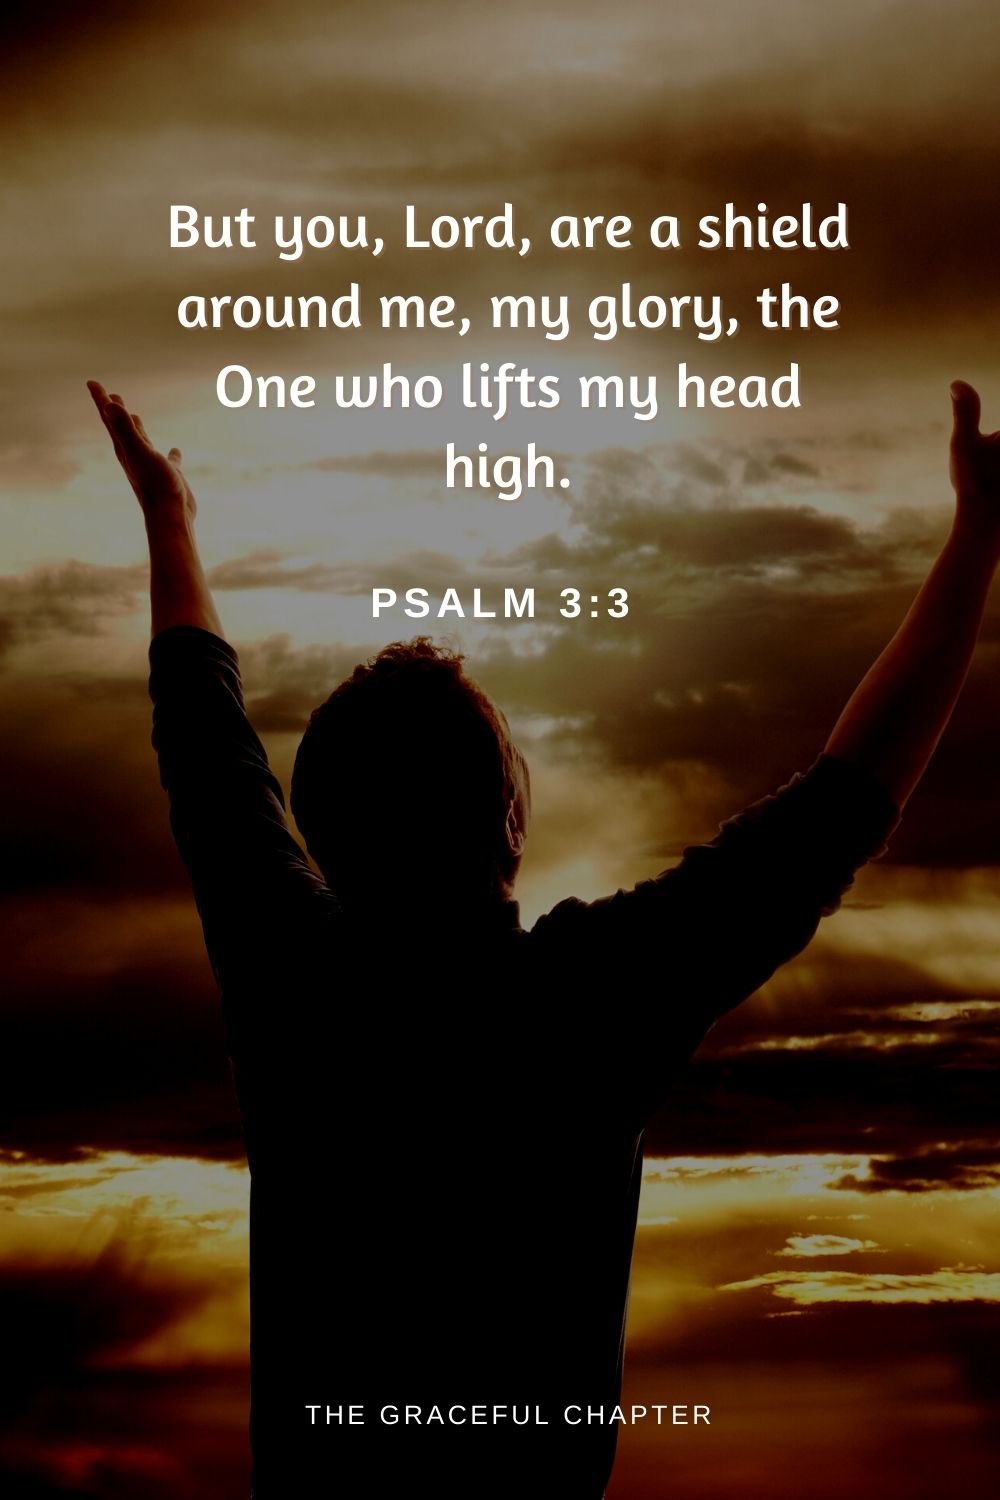 But you, Lord, are a shield around me, my glory, the One who lifts my head high.